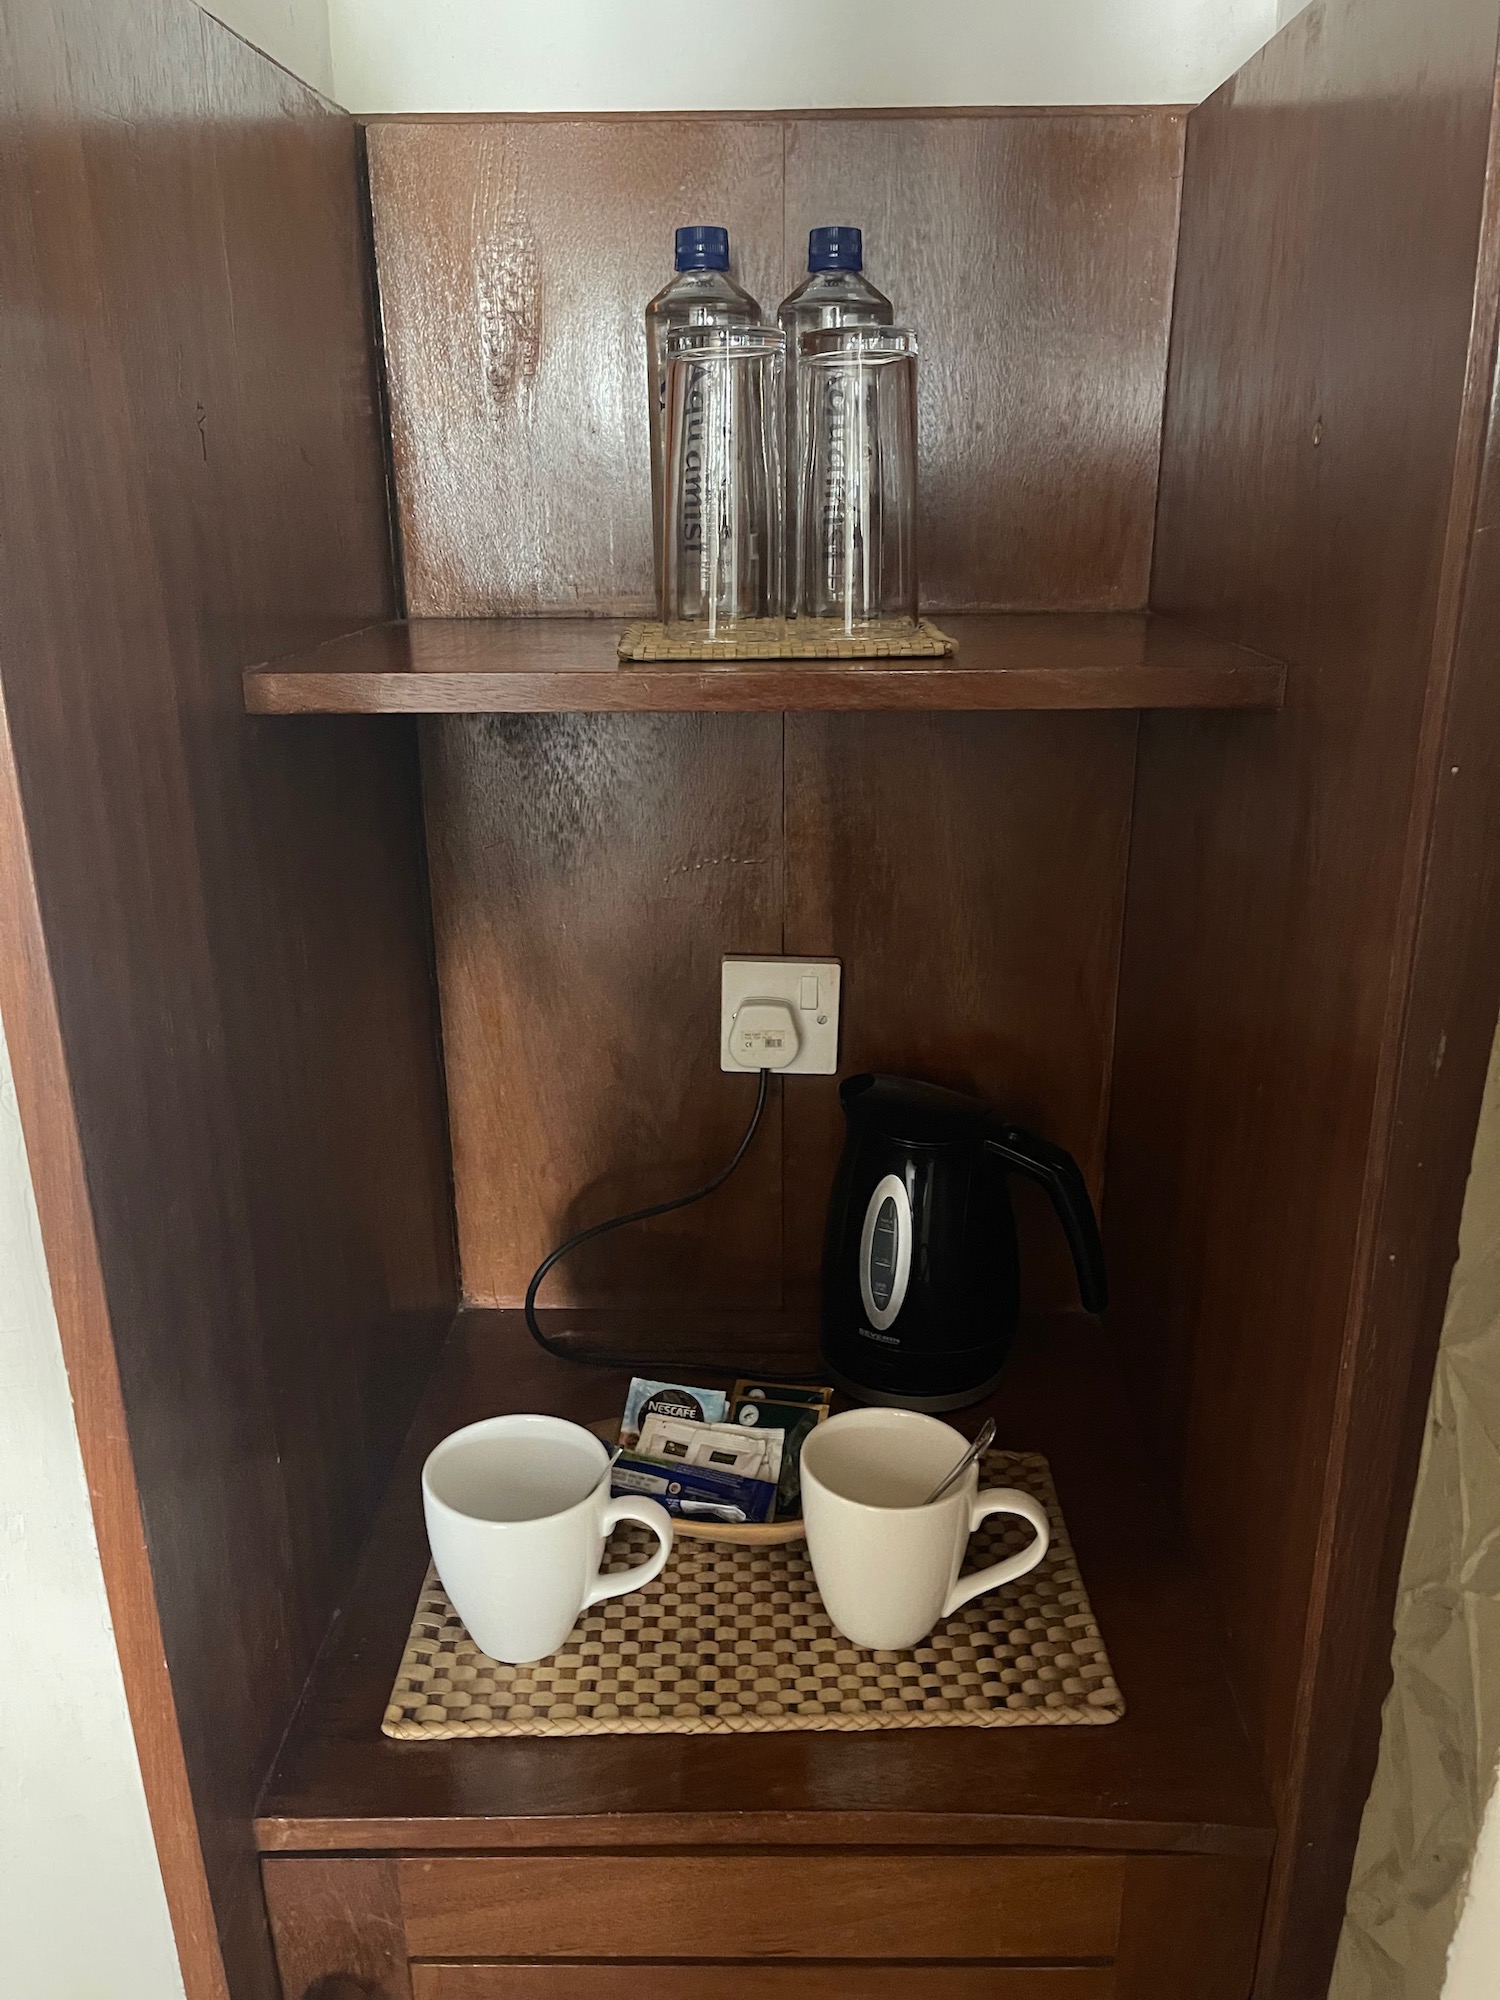 a shelf with cups and water bottles on it